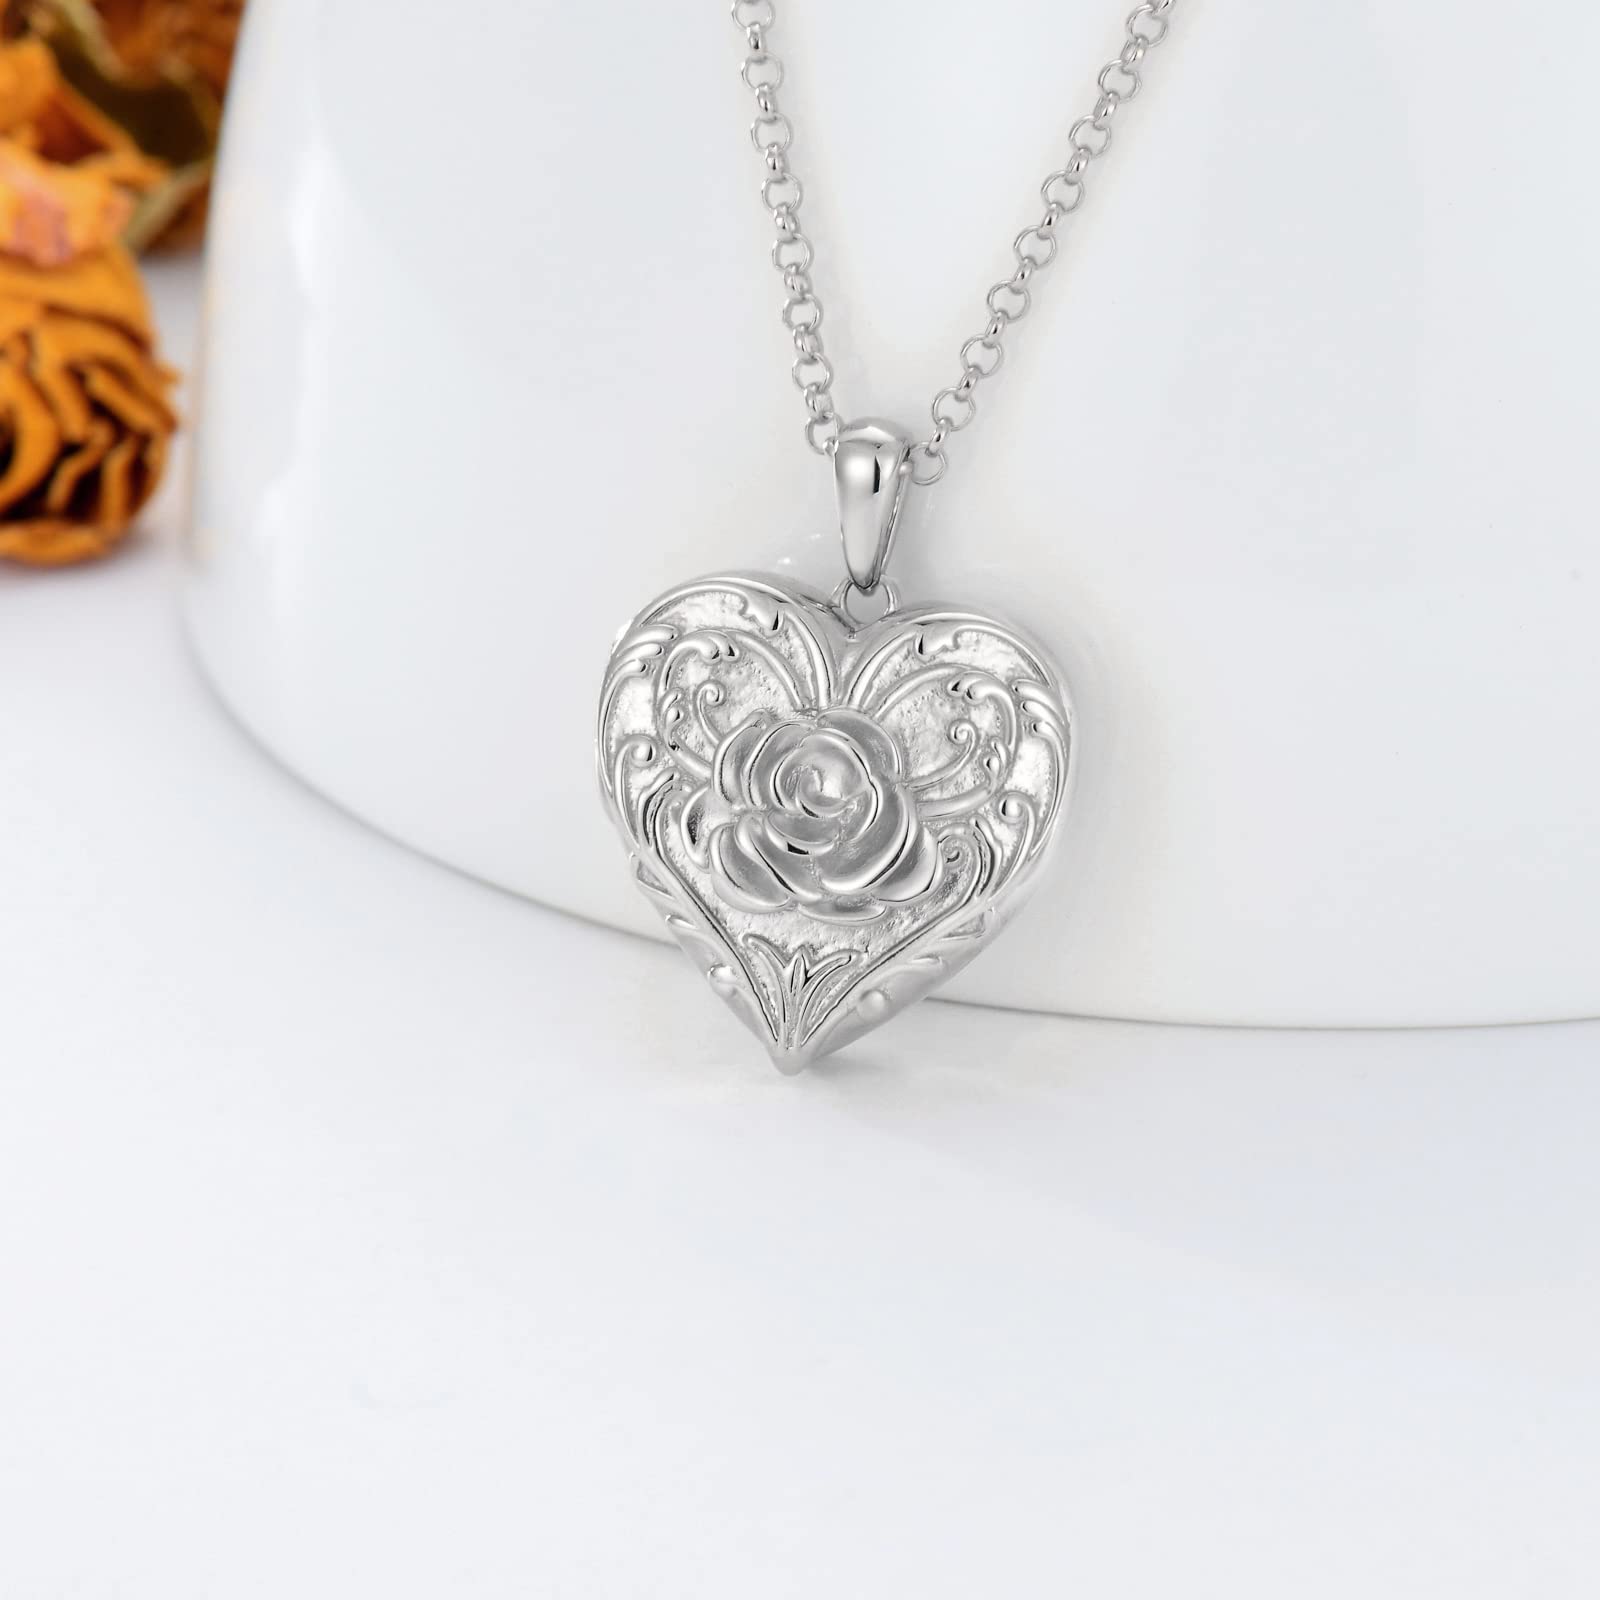 SOULMEET Sunflower/Rose White Locket Necklace That Holds Pictures Photo Keep Someone Near to You Personalized Sterling Silver/Real White Gold Locket Gift